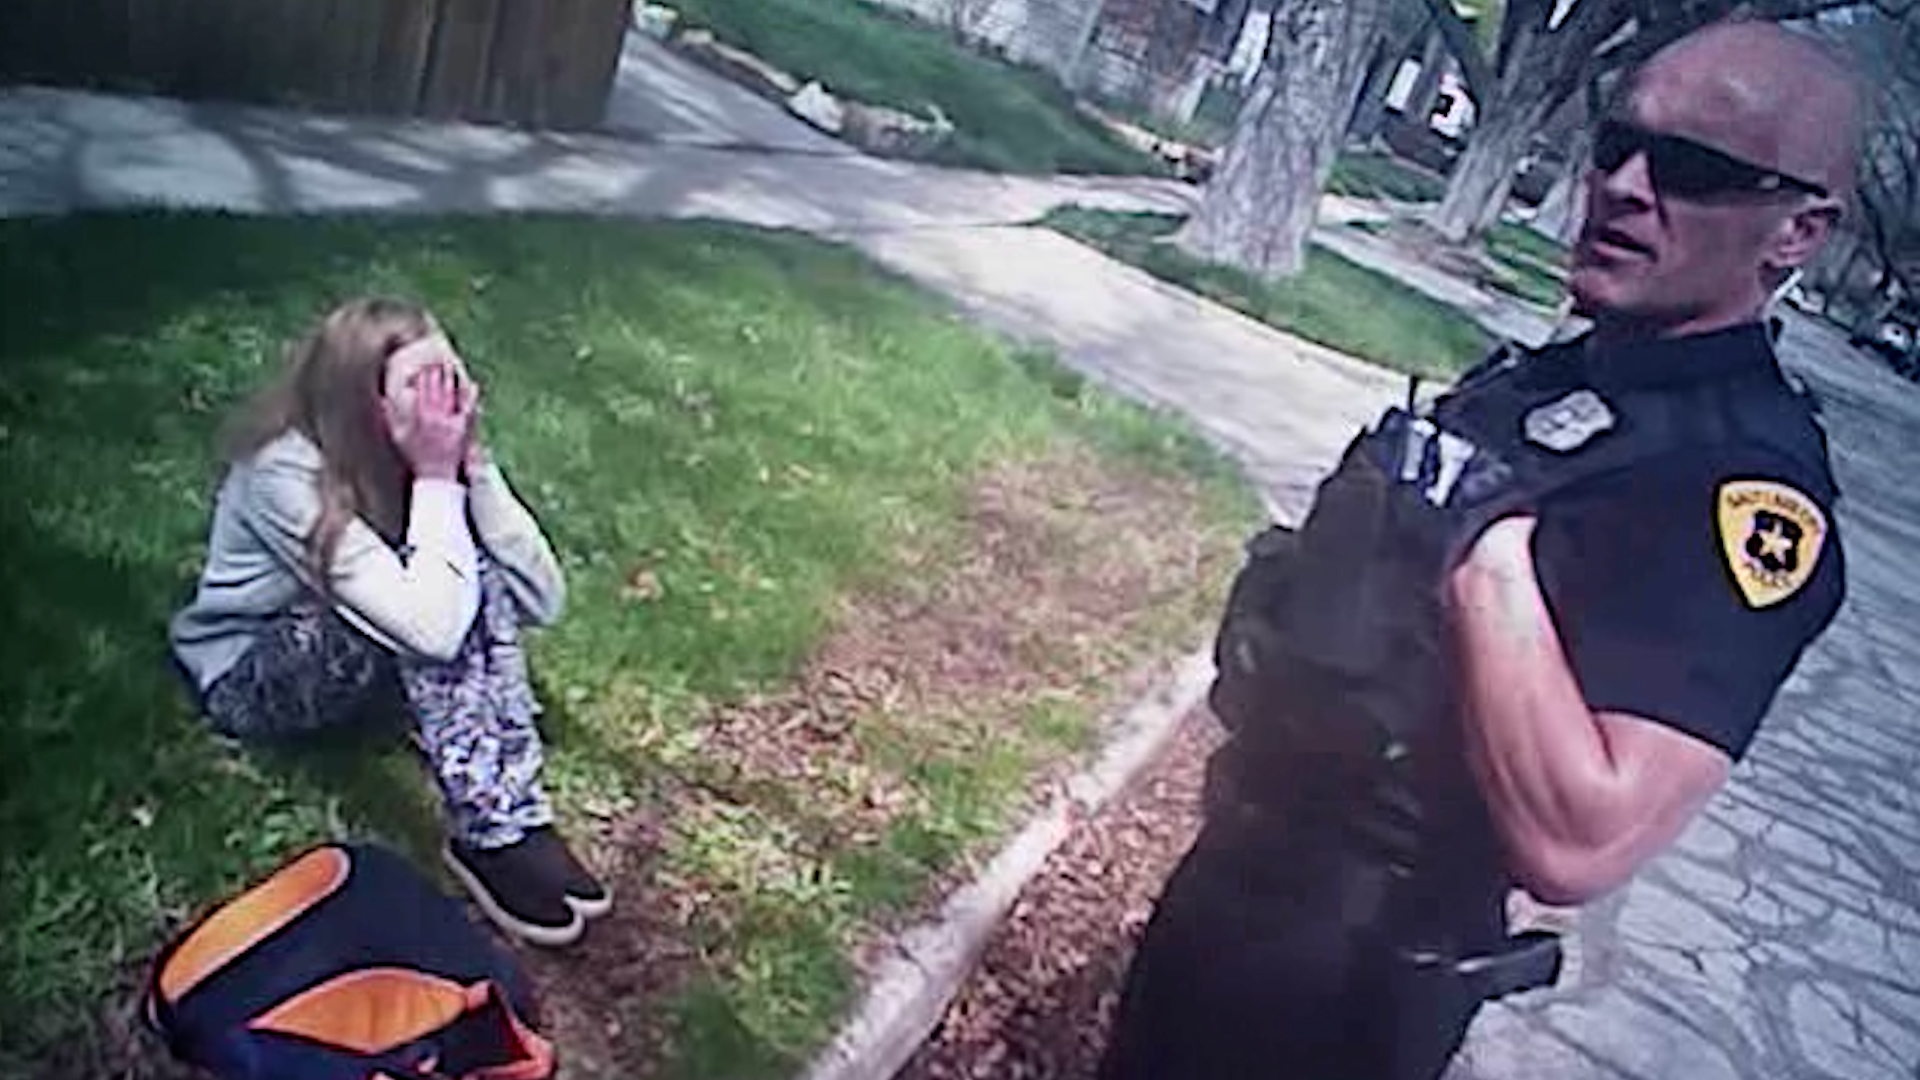 Salt Lake City police body camera video shows Megan speaking with officers and medics  in March 202...